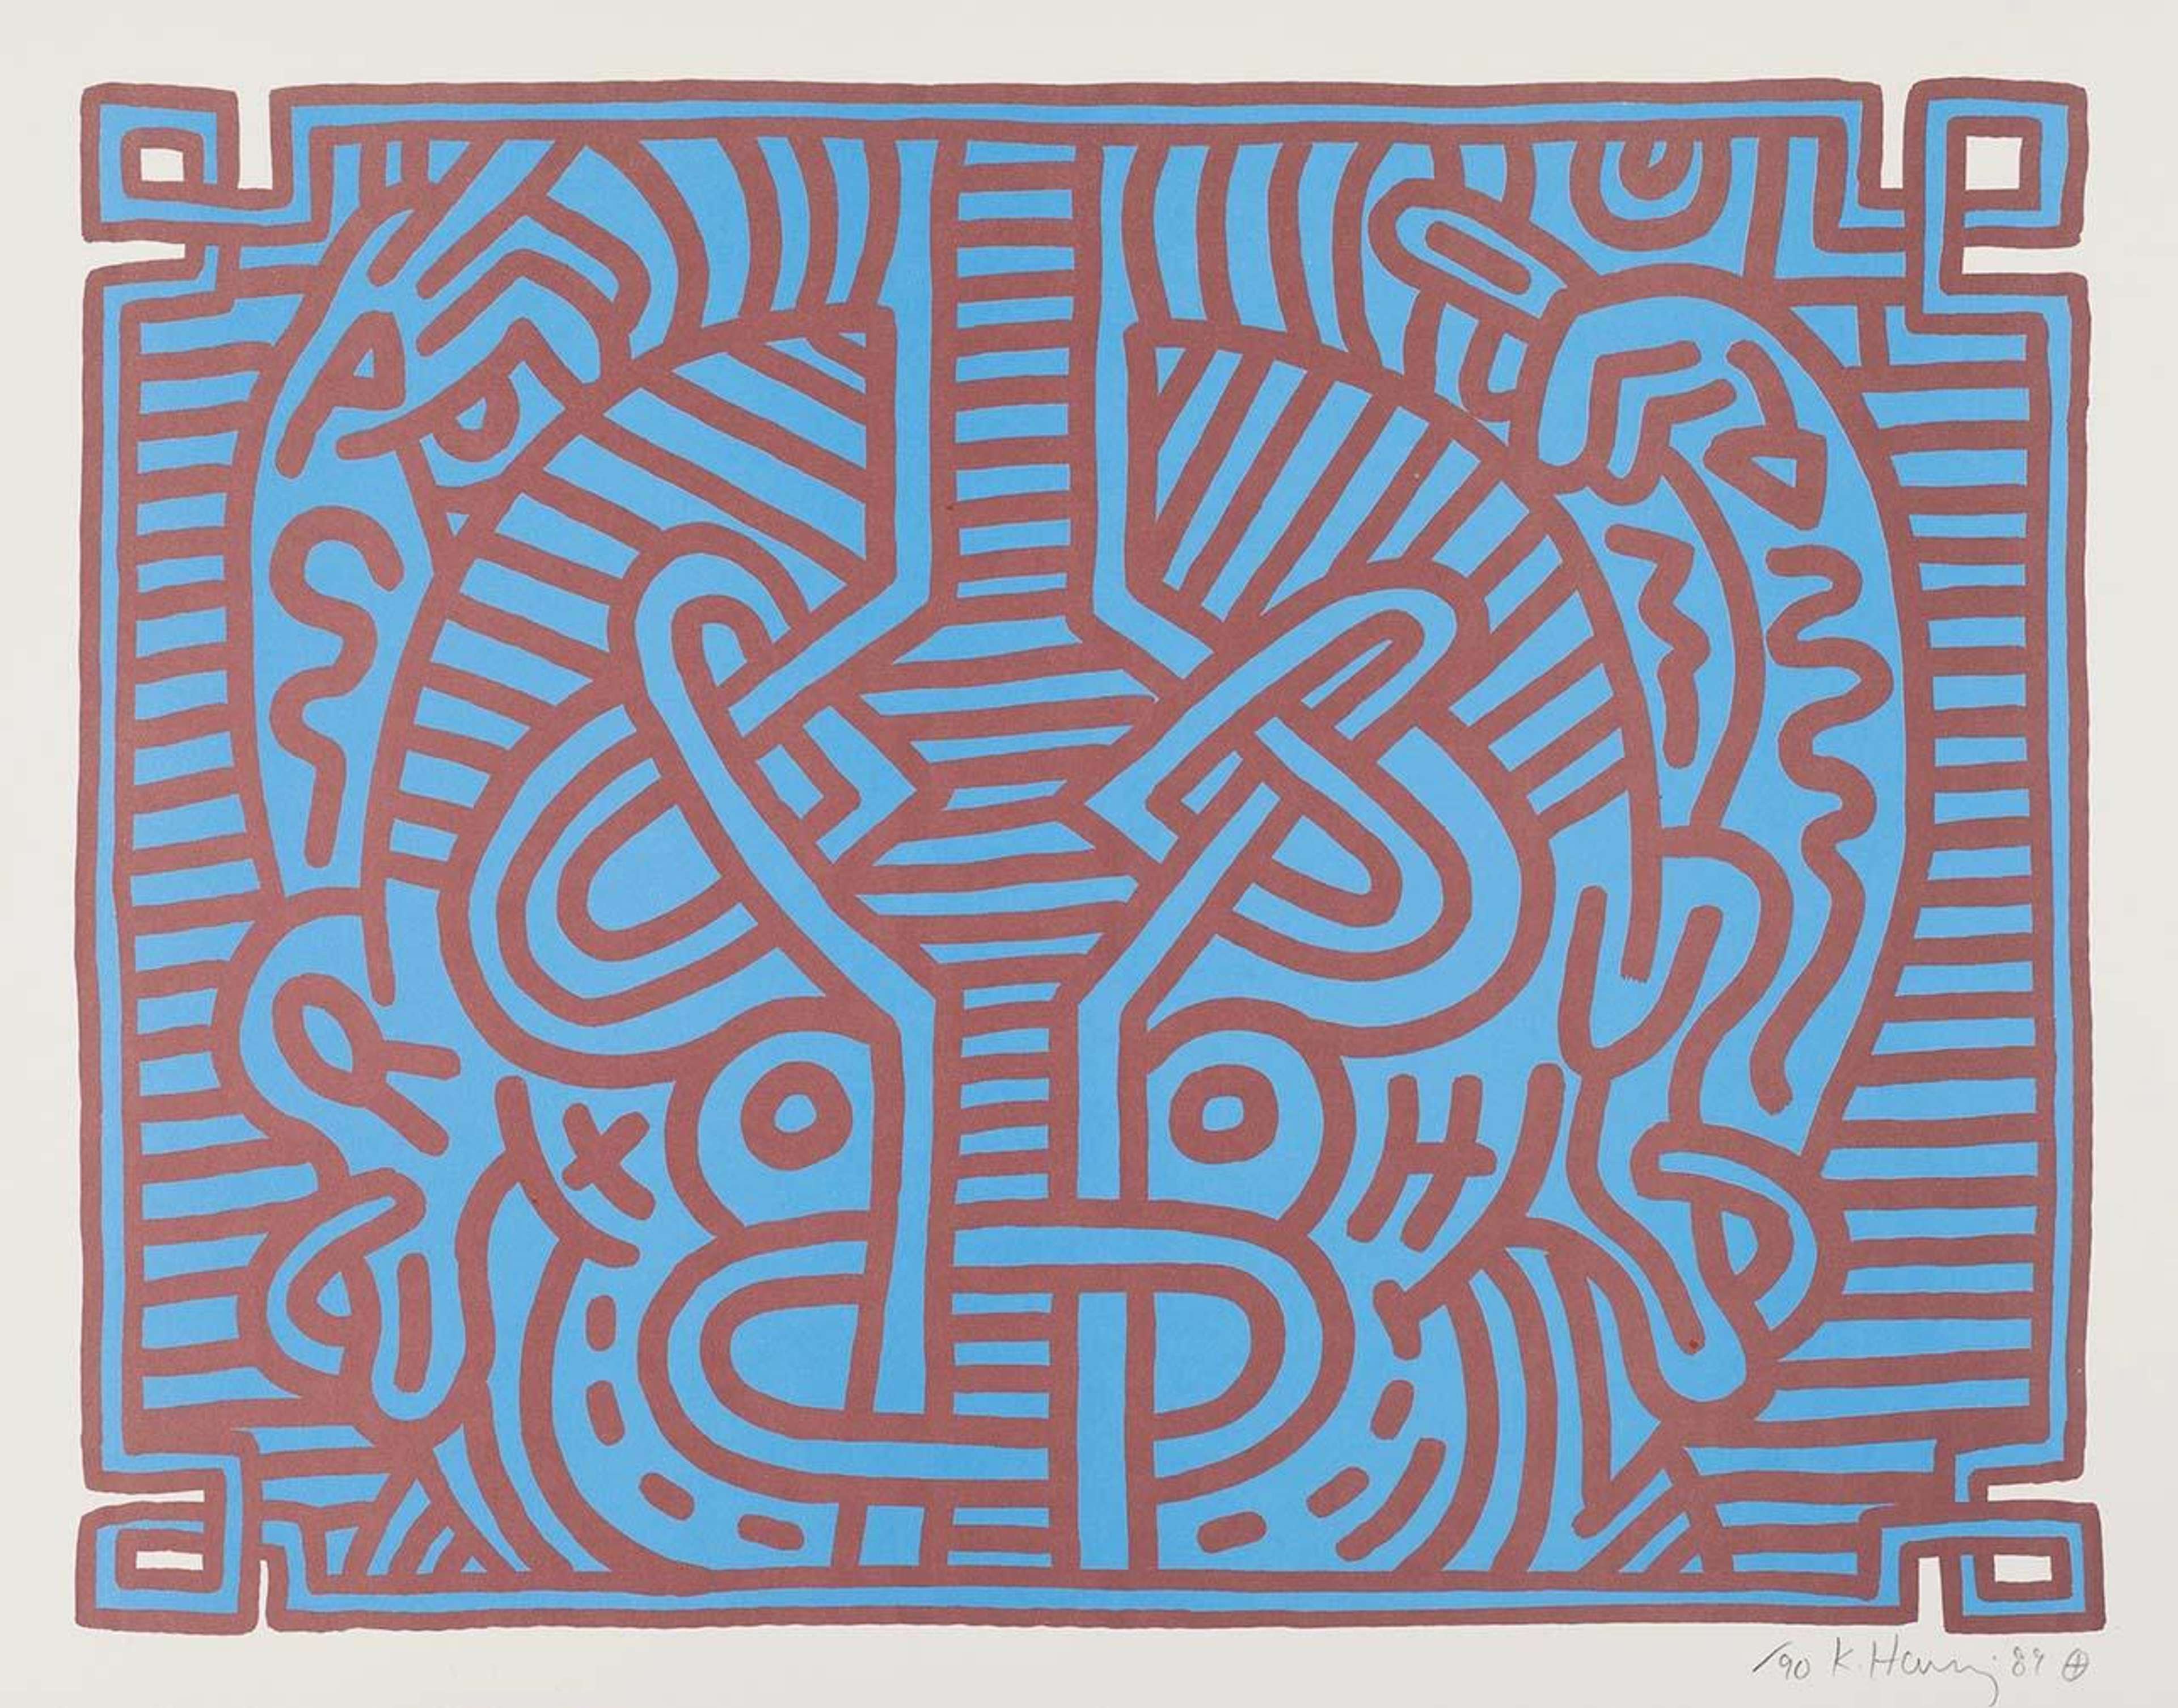 Keith Haring’s Chocolate Buddha 1. A Pop Art lithograph of an Aboriginal-inspired abstract face of symmetrical red lines against a blue background.